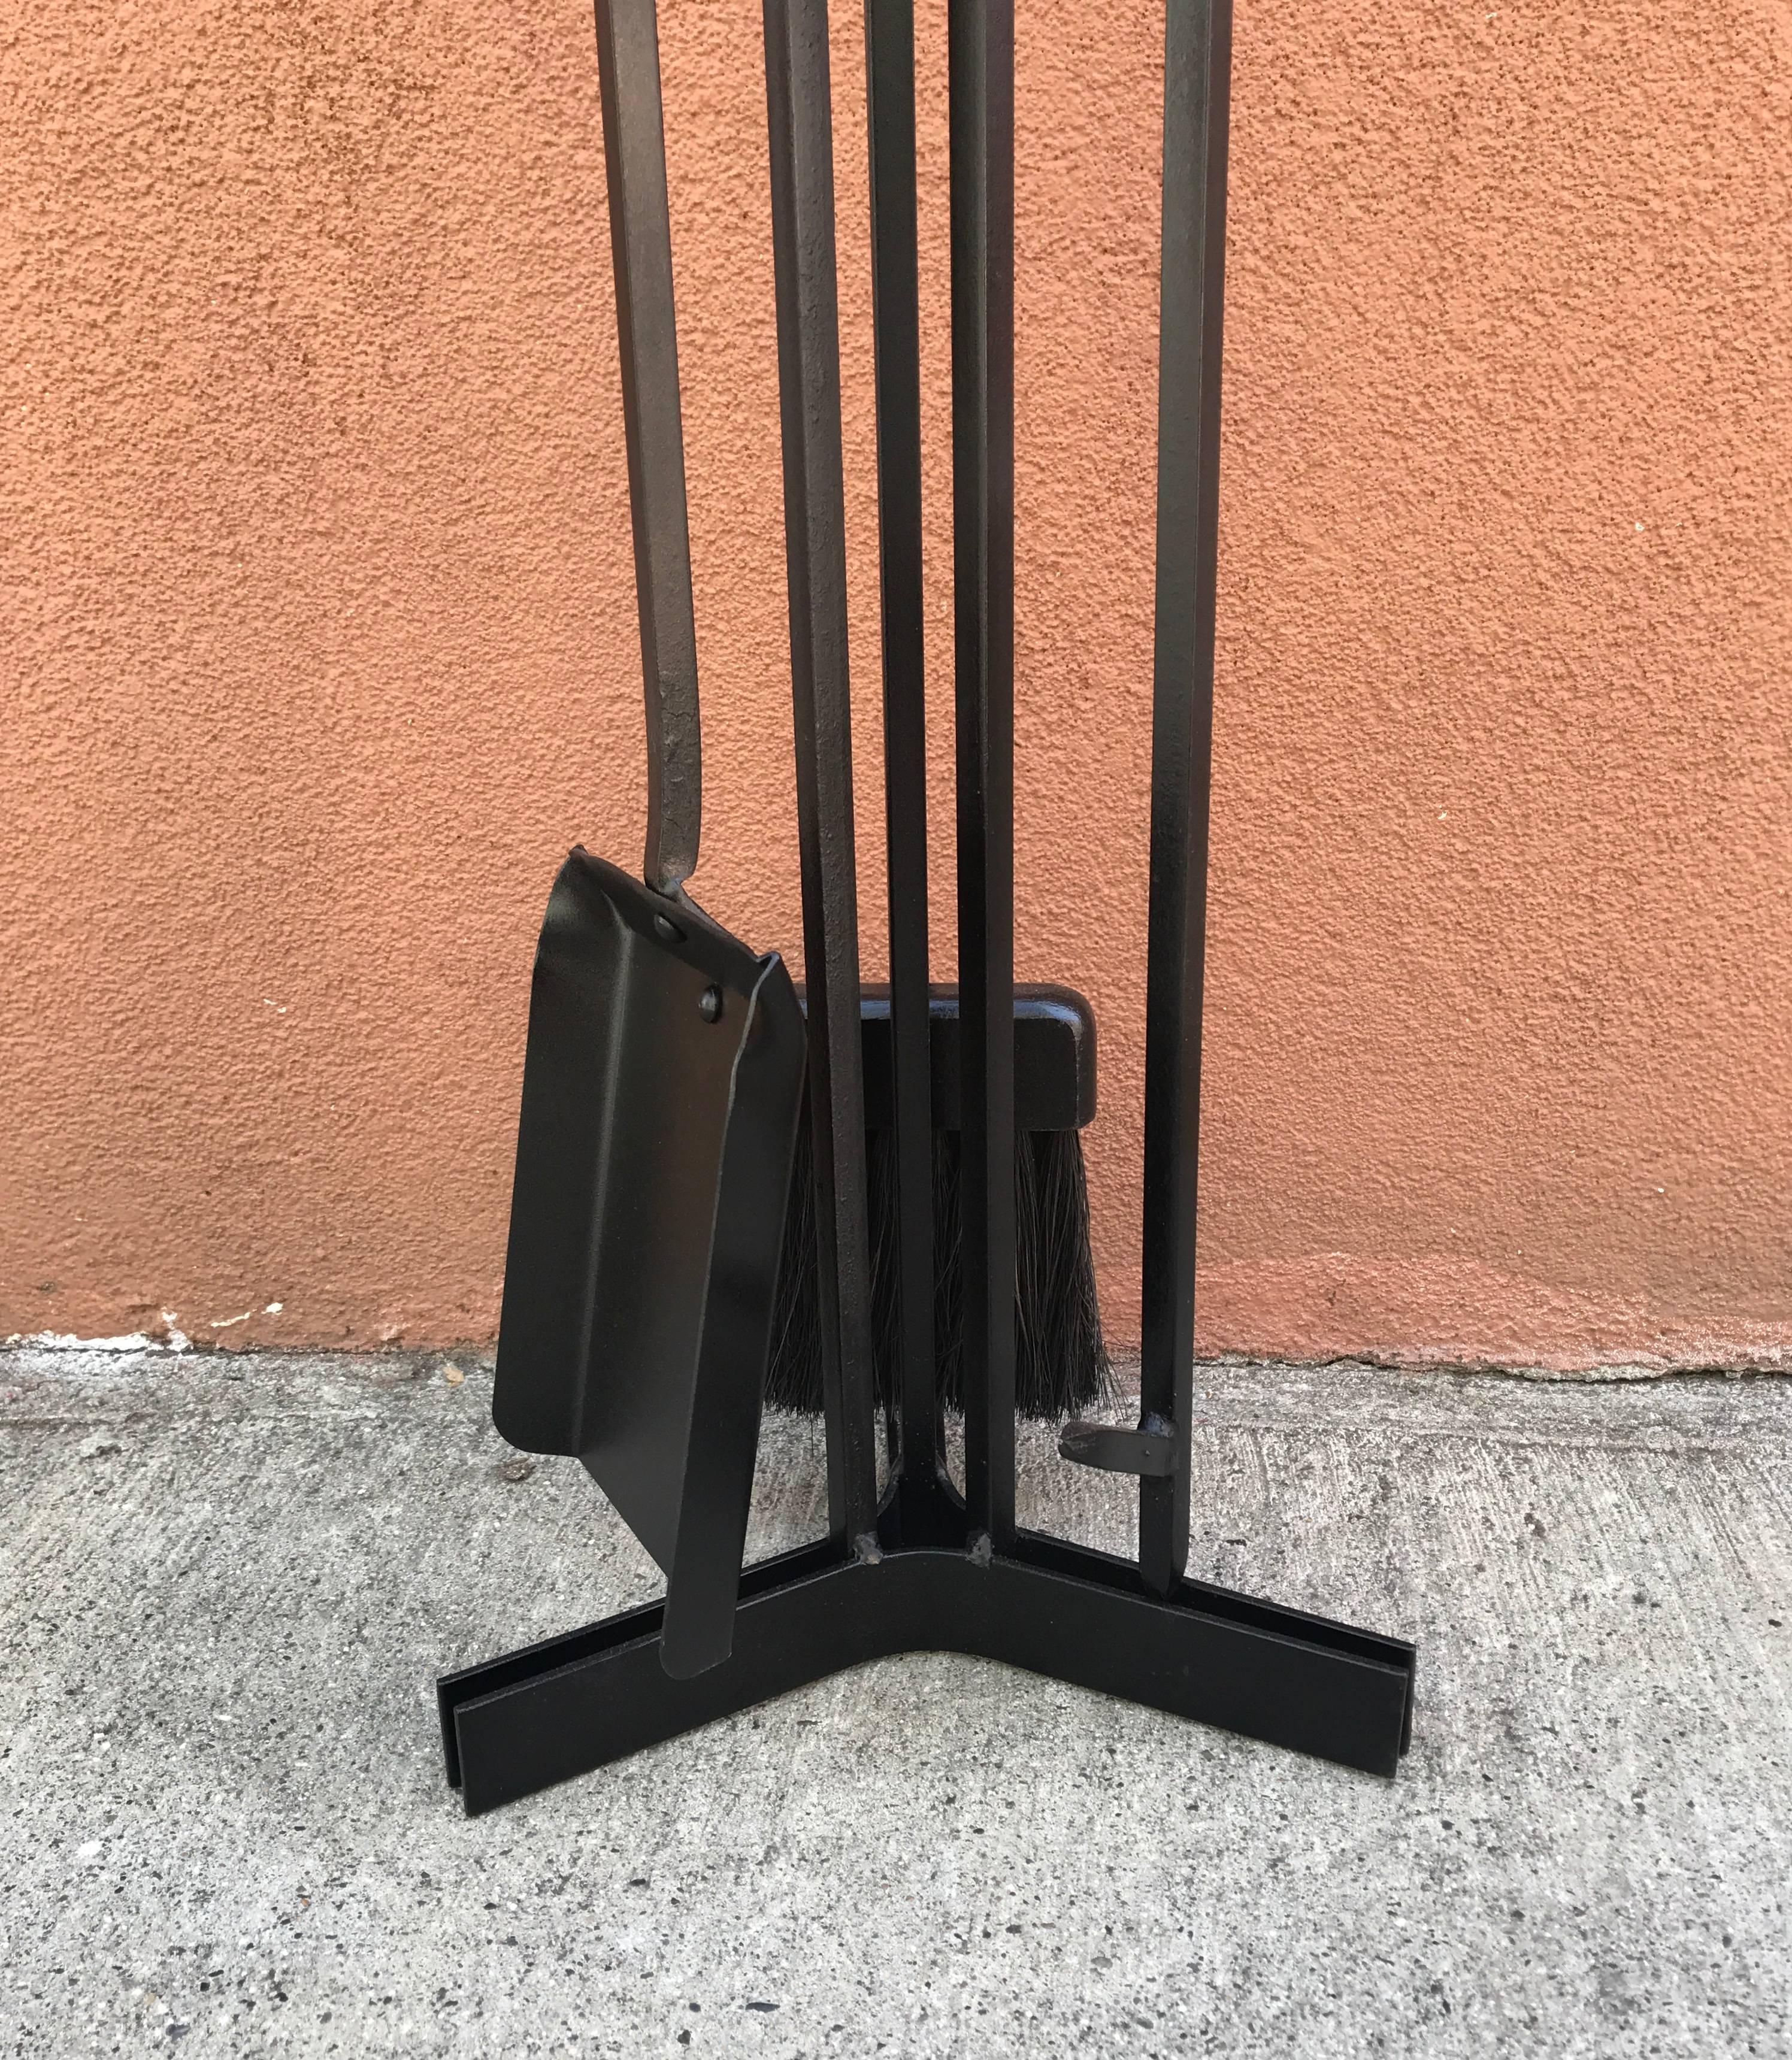 American Modern Iron and Wood Fireplace Tools In Excellent Condition For Sale In San Francisco, CA